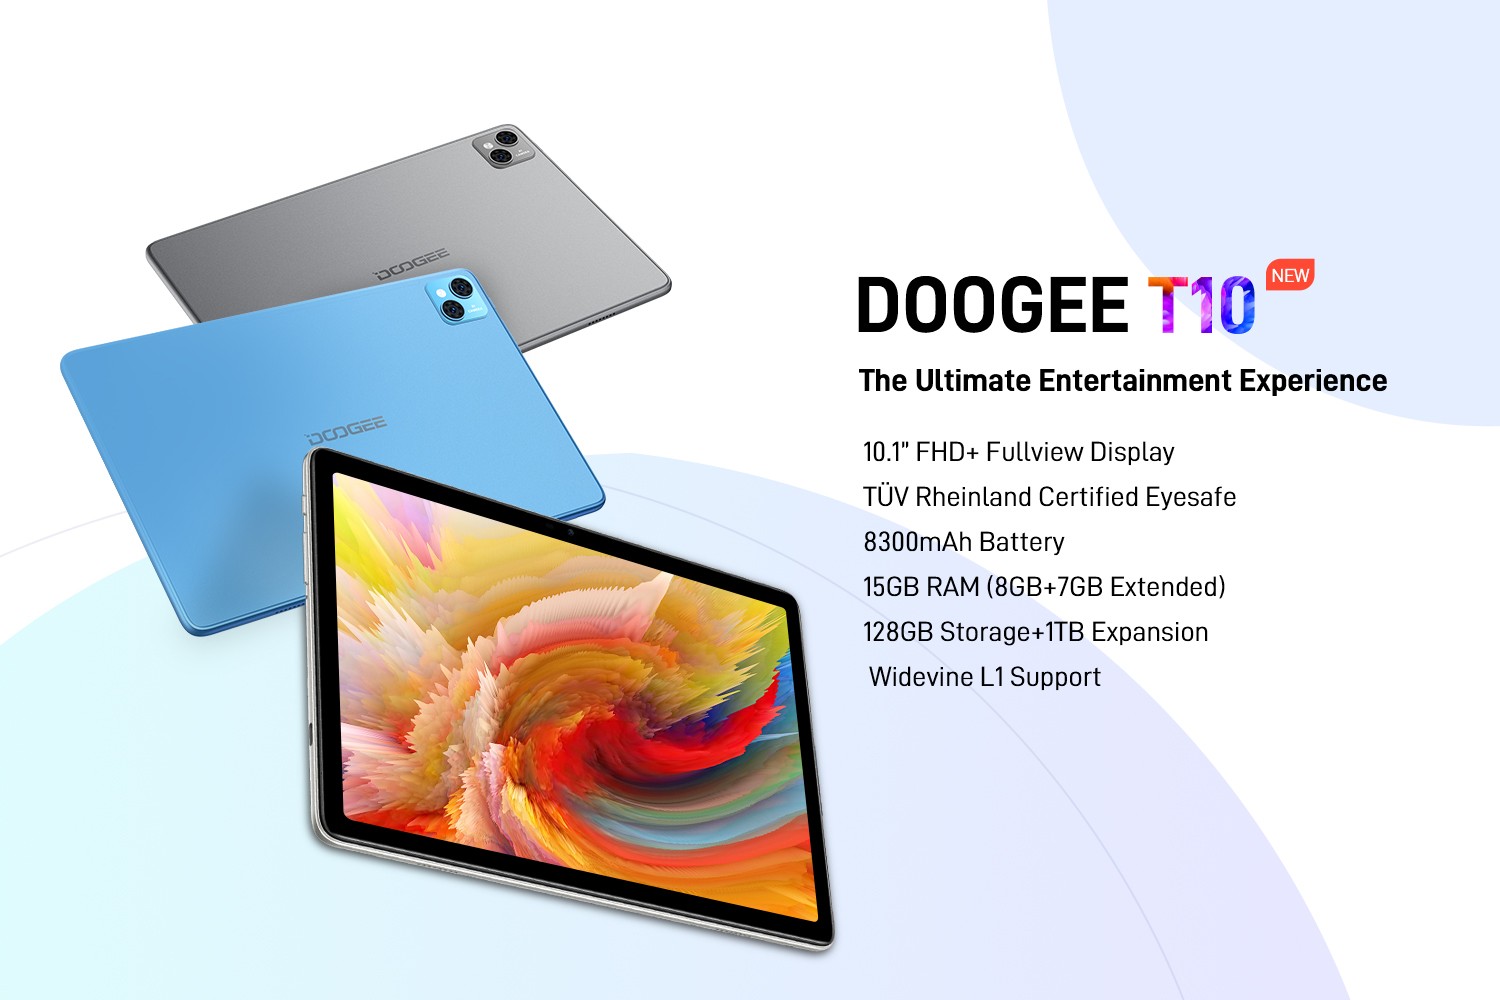 Doogee T10: the new tablet for unprecedented entertainment